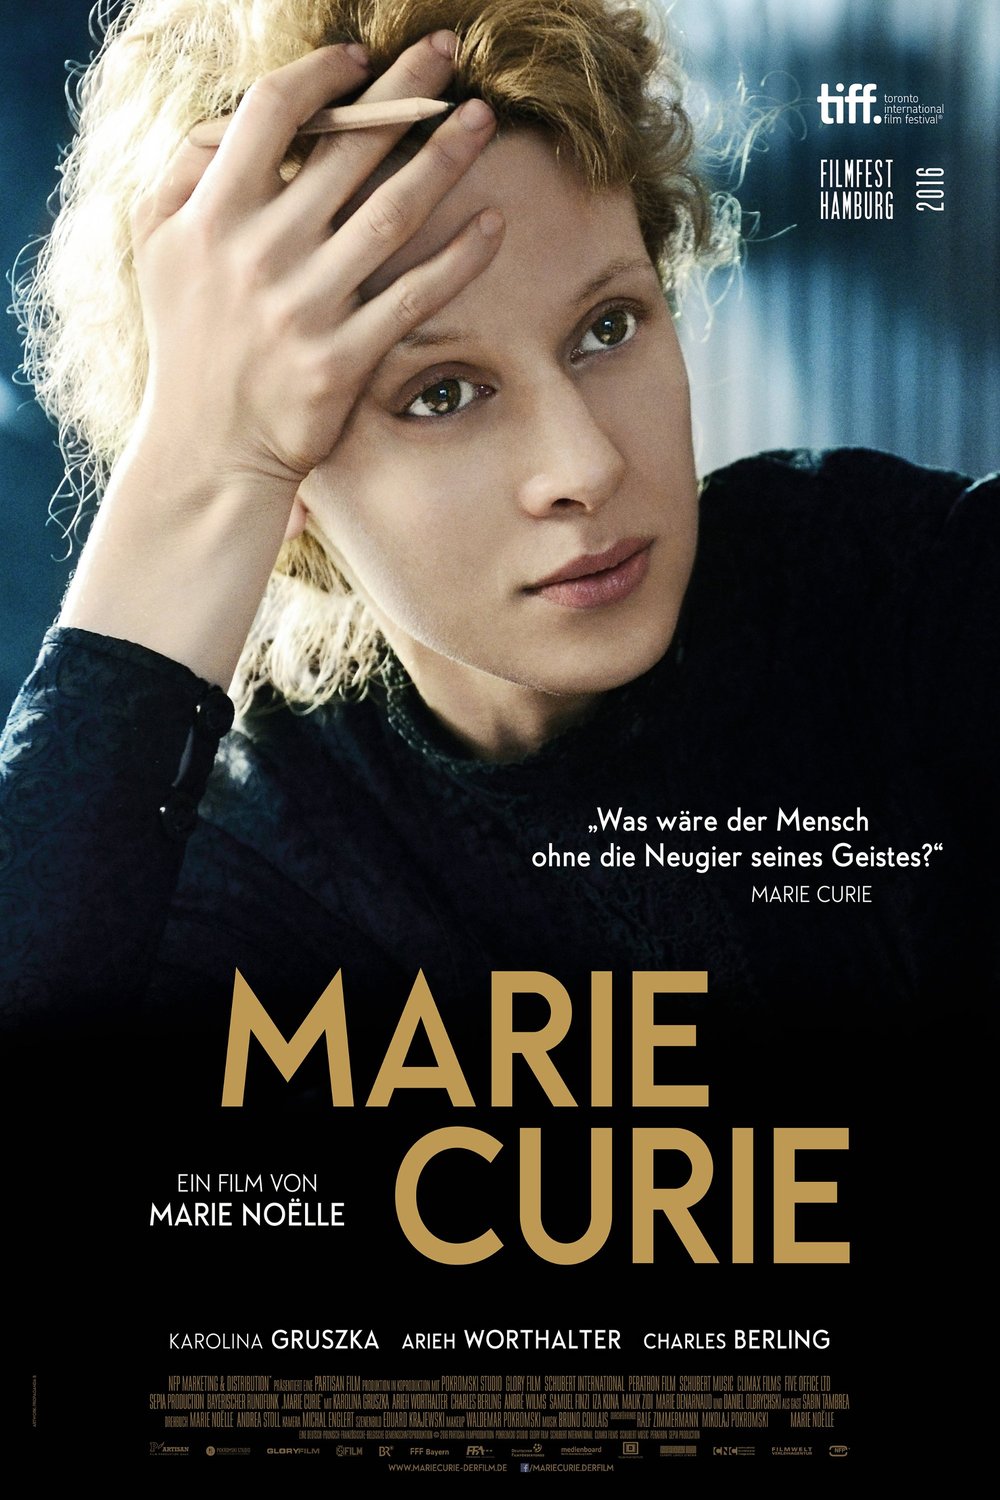 German poster of the movie Marie Curie: The Courage of Knowledge